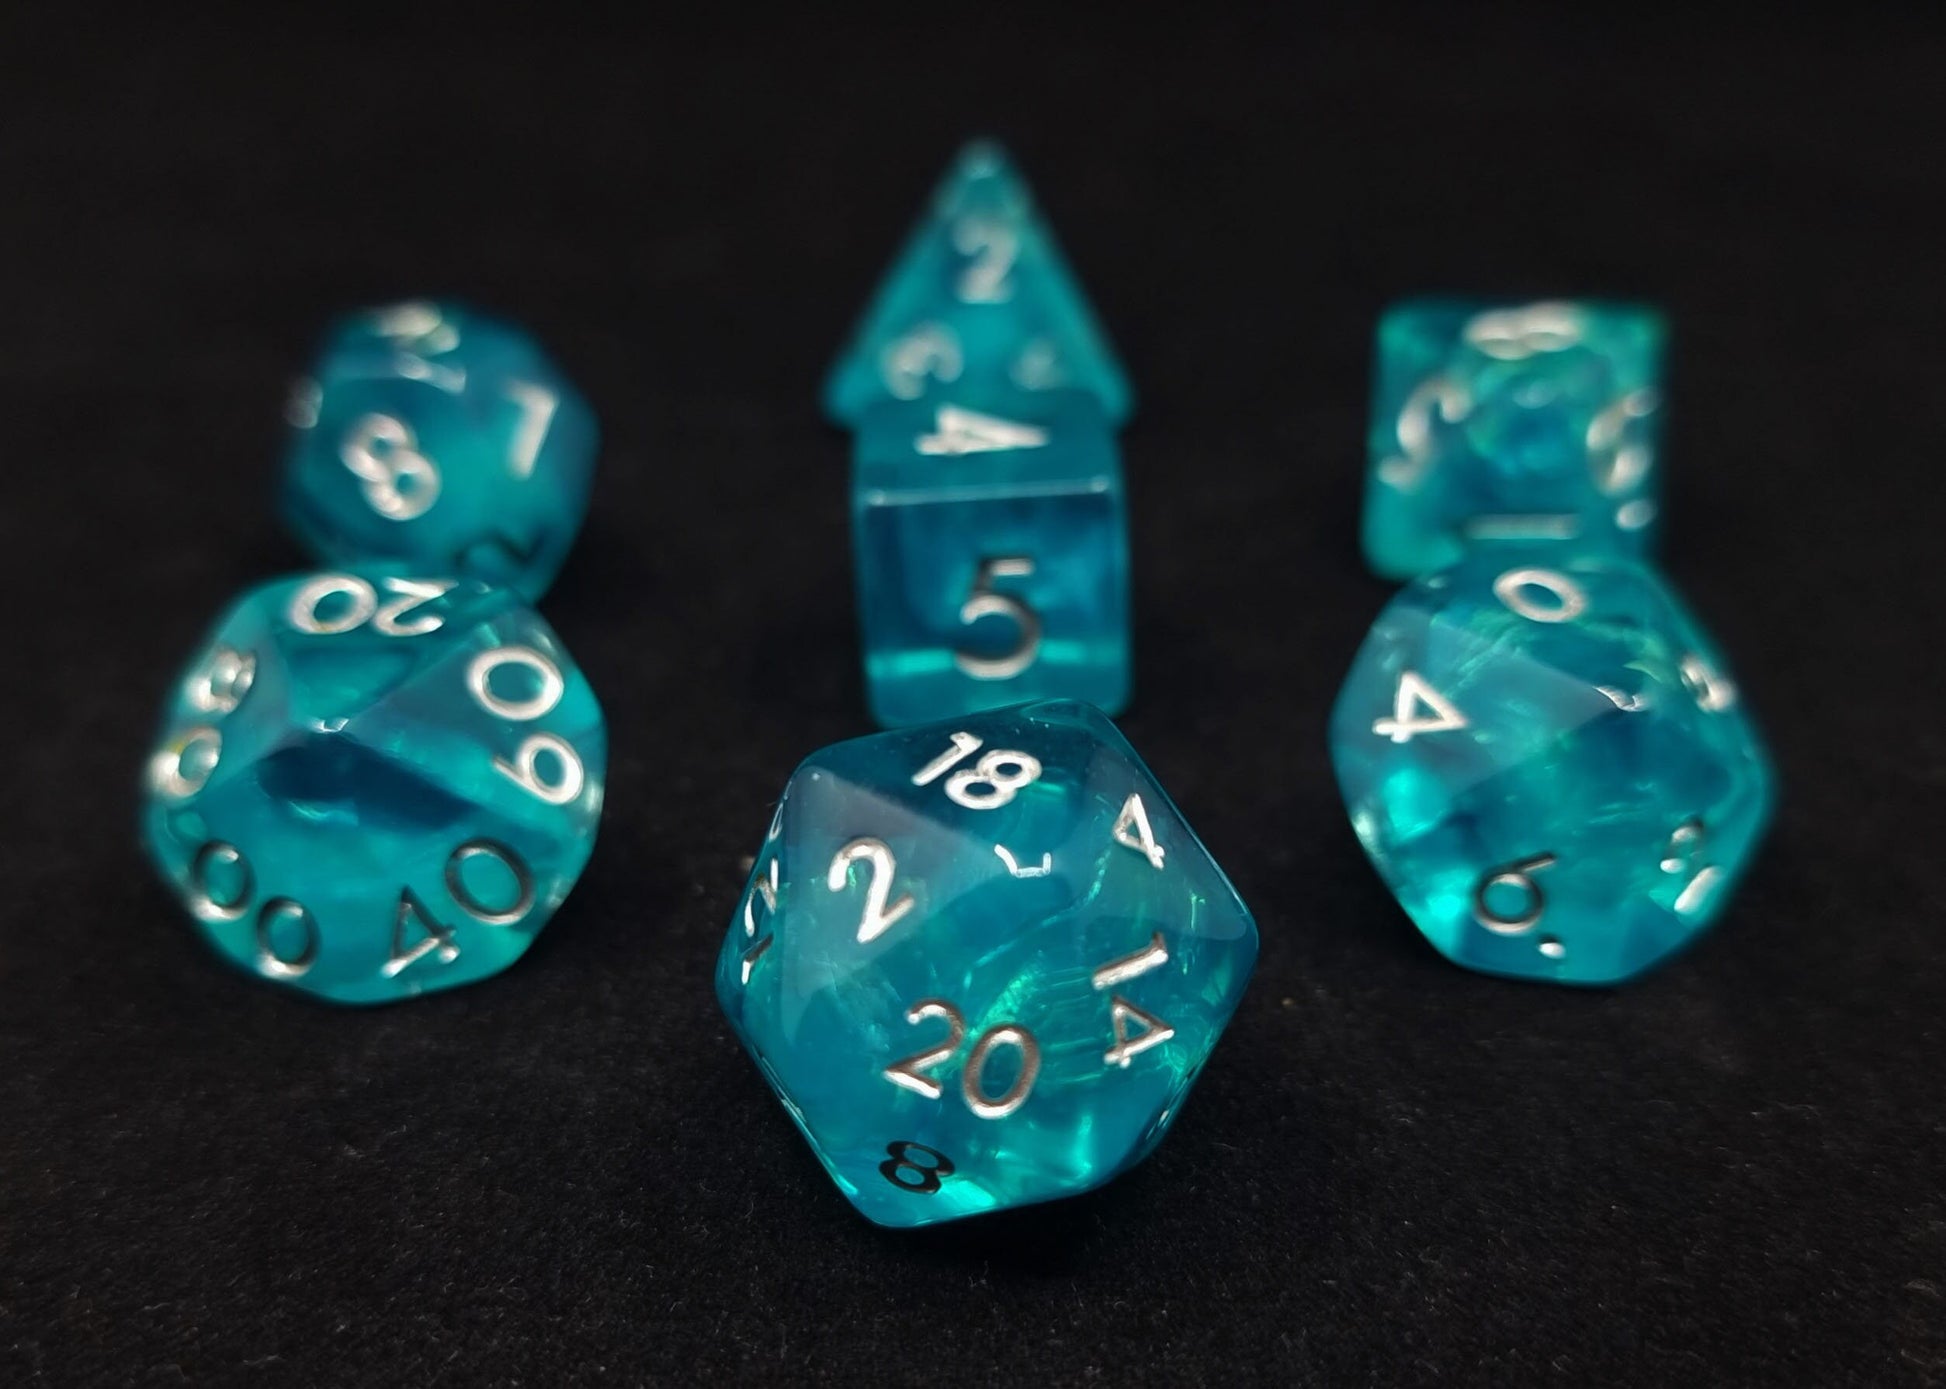 Reflection Pool Polyhedral Dice Set - Translucent Turquoise with Iridescent Foil Core